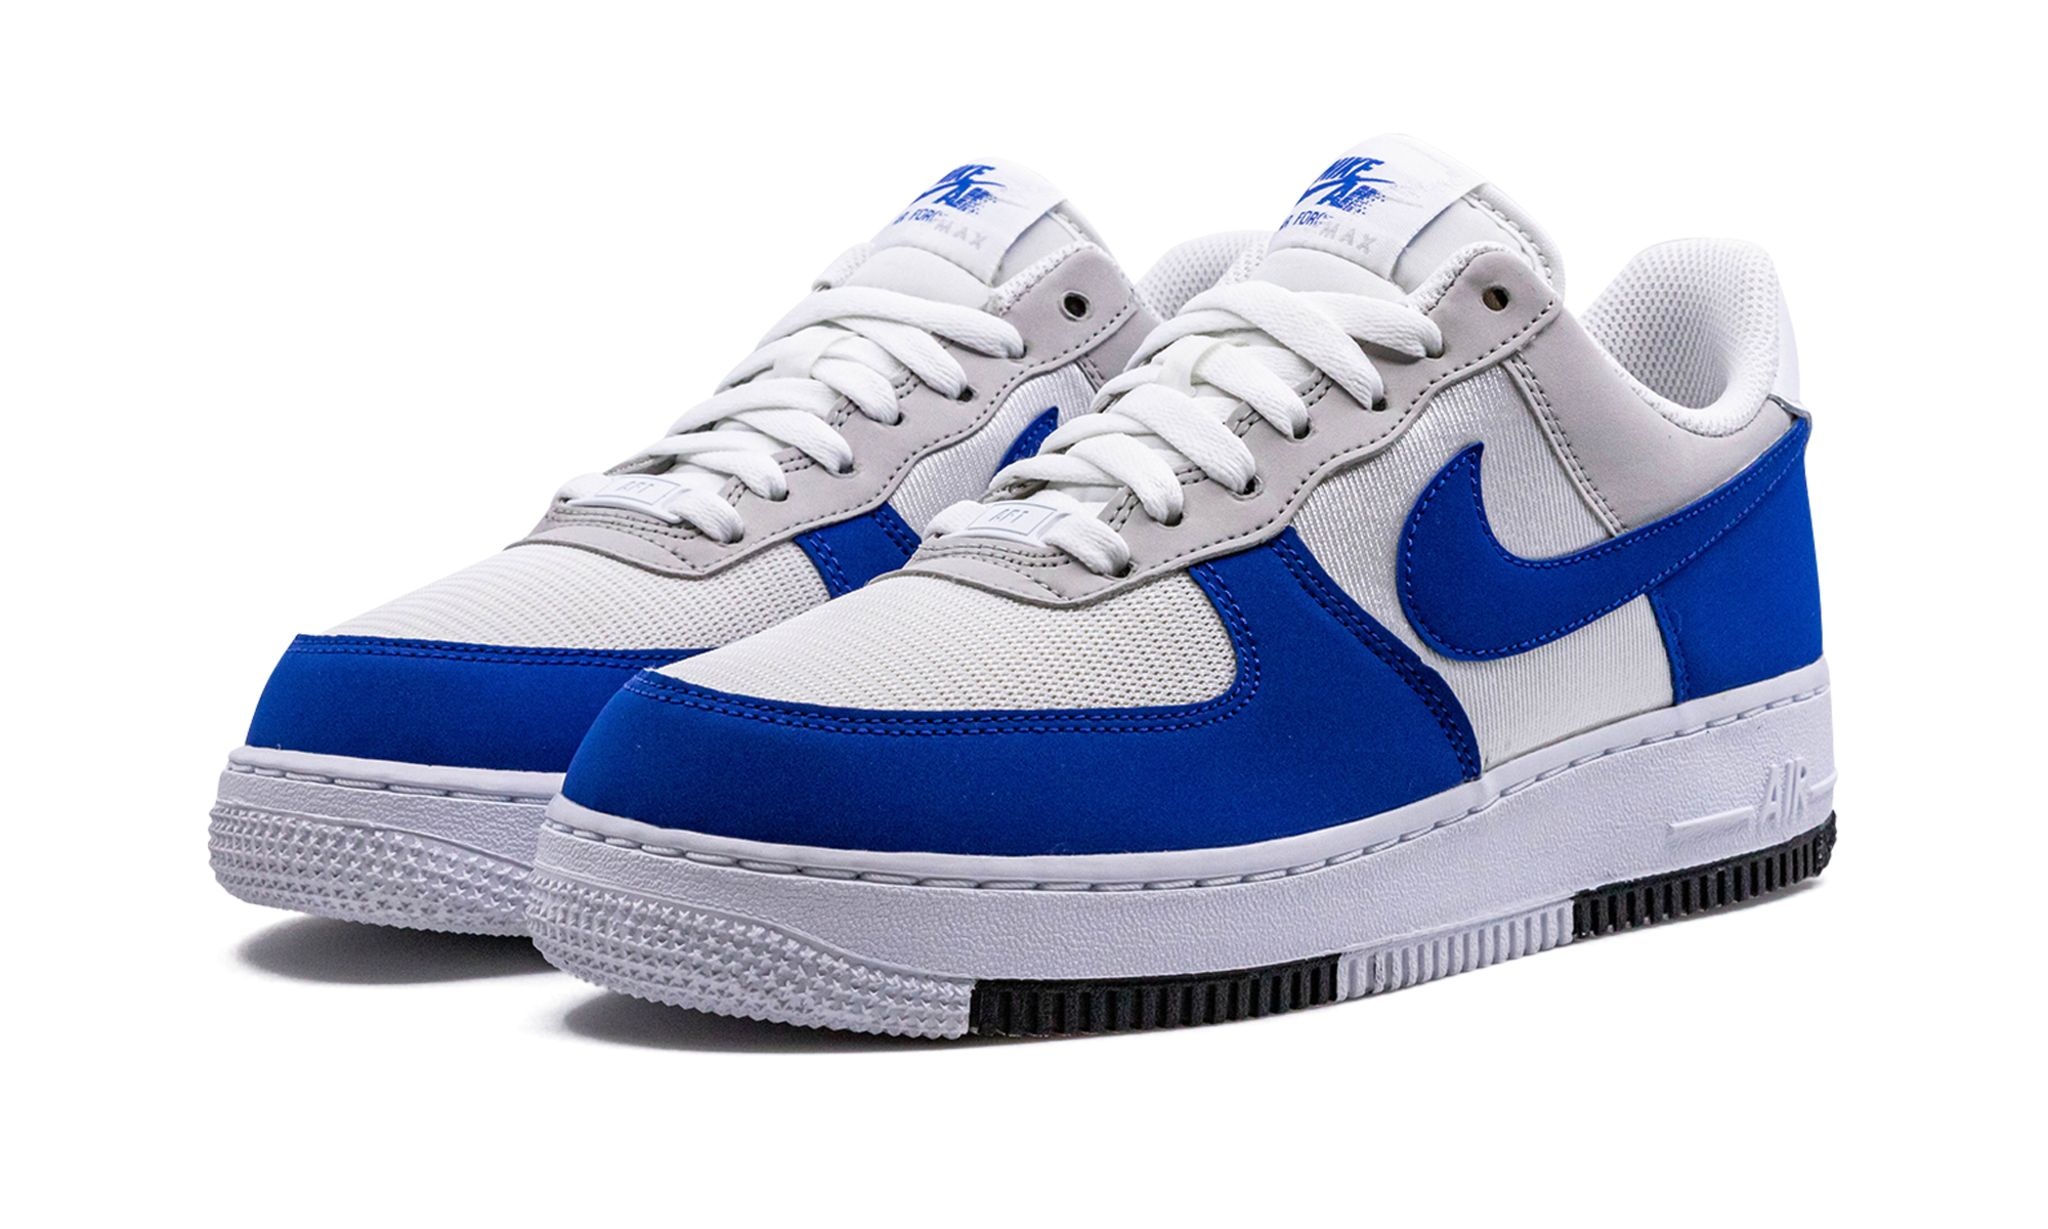 Air Force 1 Low "Timeless" - 2